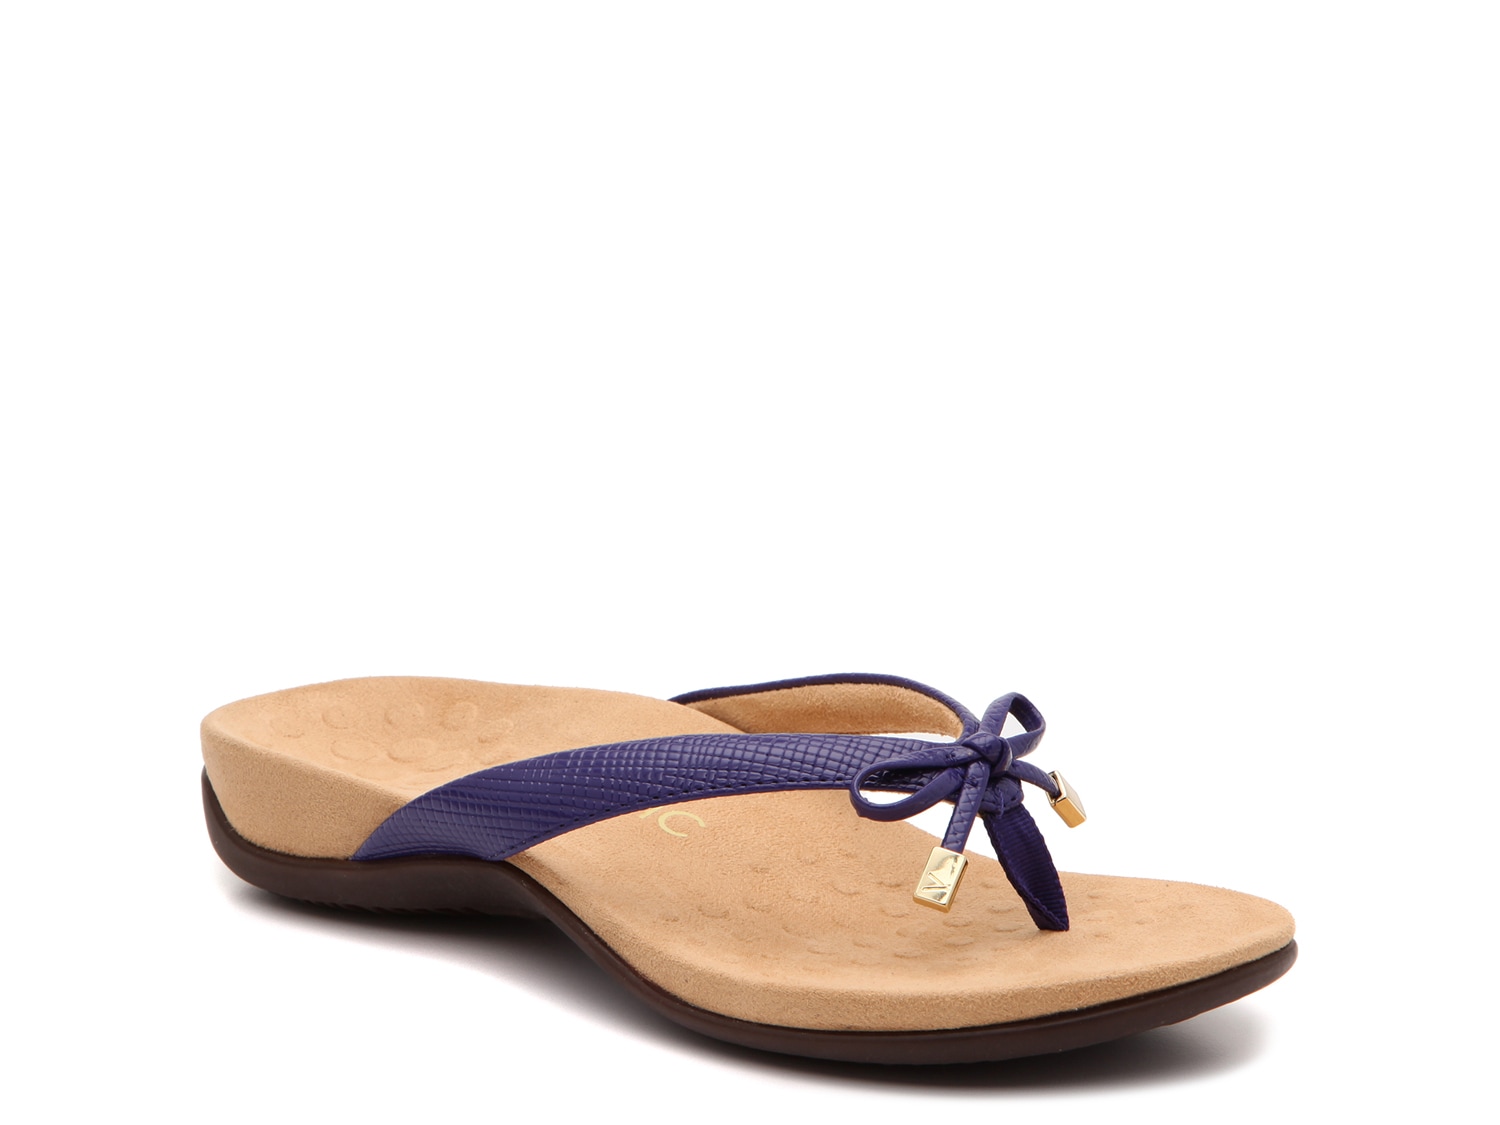 orthaheel sandals clearance